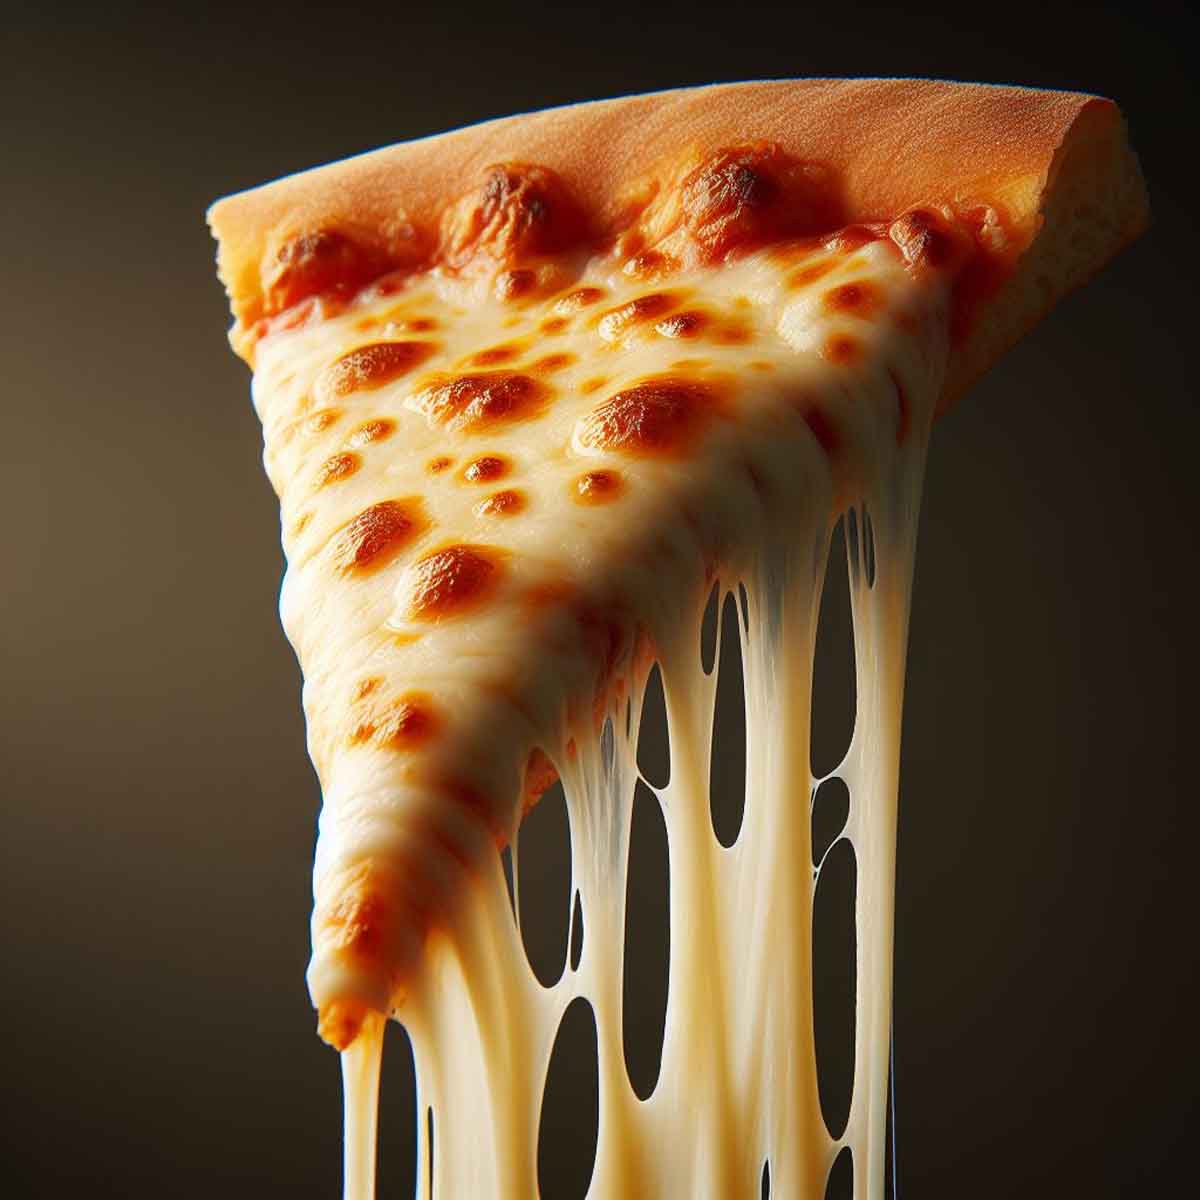 Close-up of a Domino's cheese pizza slice with stringy, melted mozzarella and a golden crust.